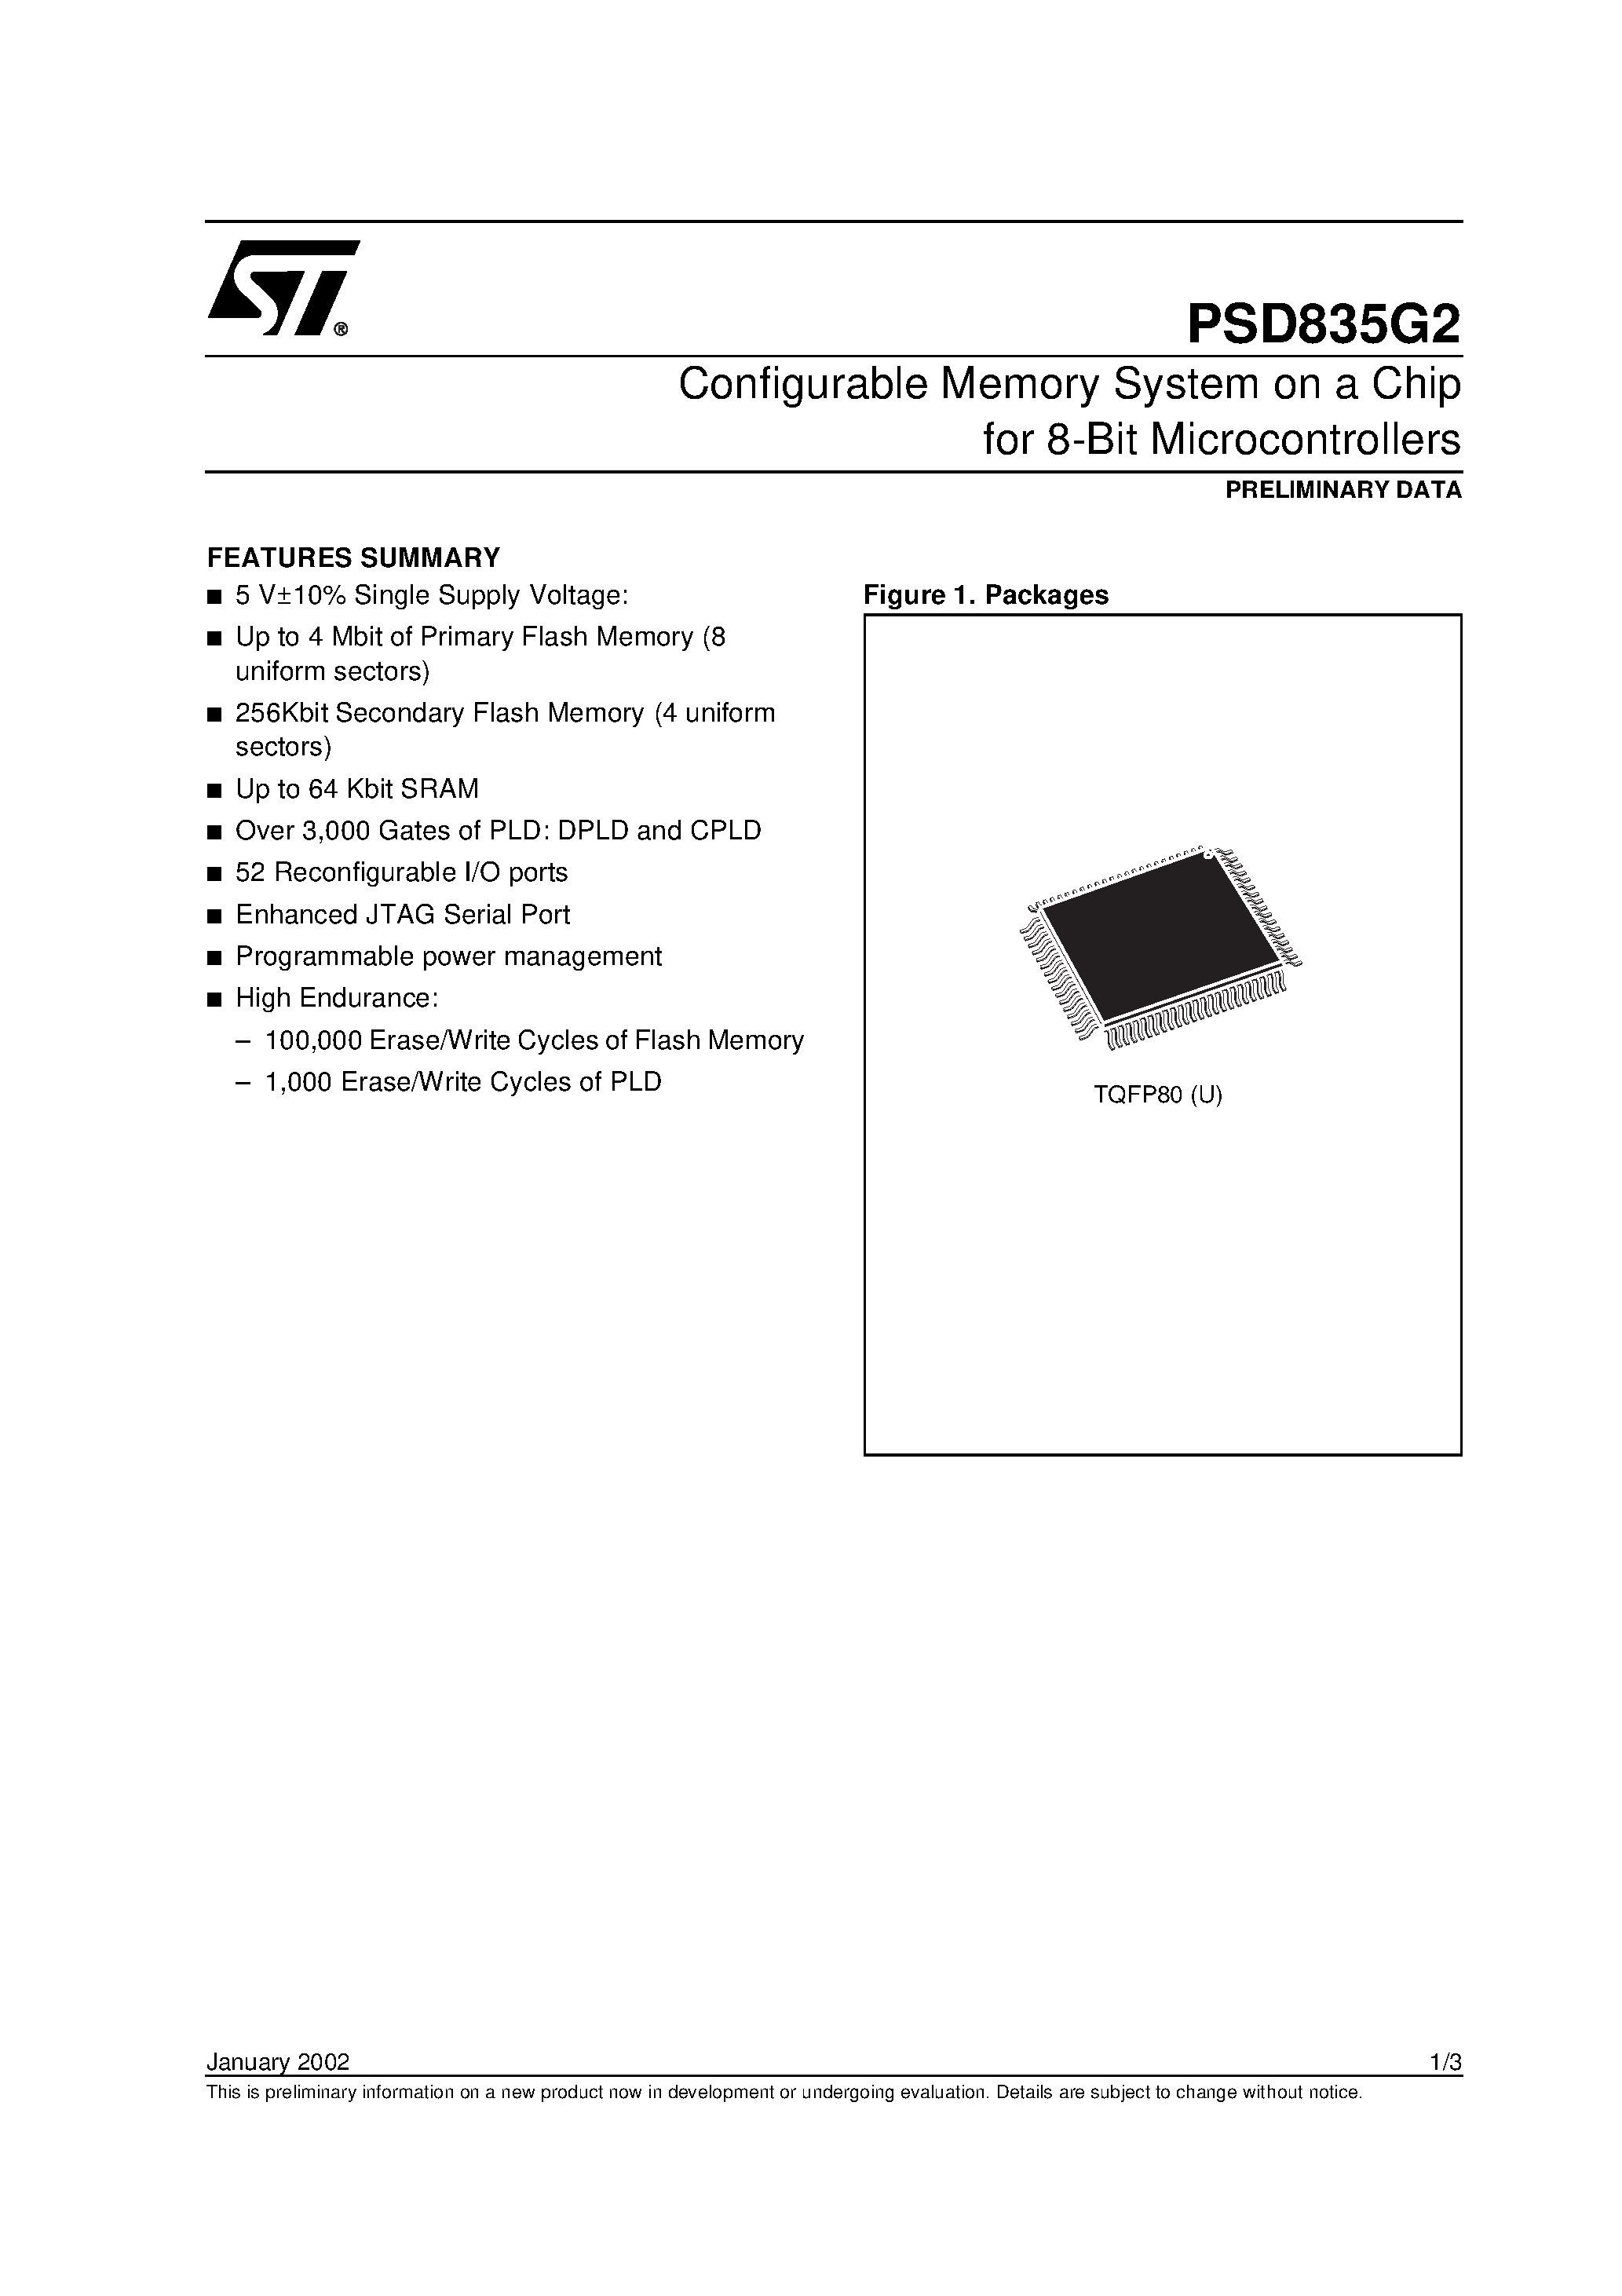 Datasheet PSD835F1-A-12U - Configurable Memory System on a Chip for 8-Bit Microcontrollers page 1